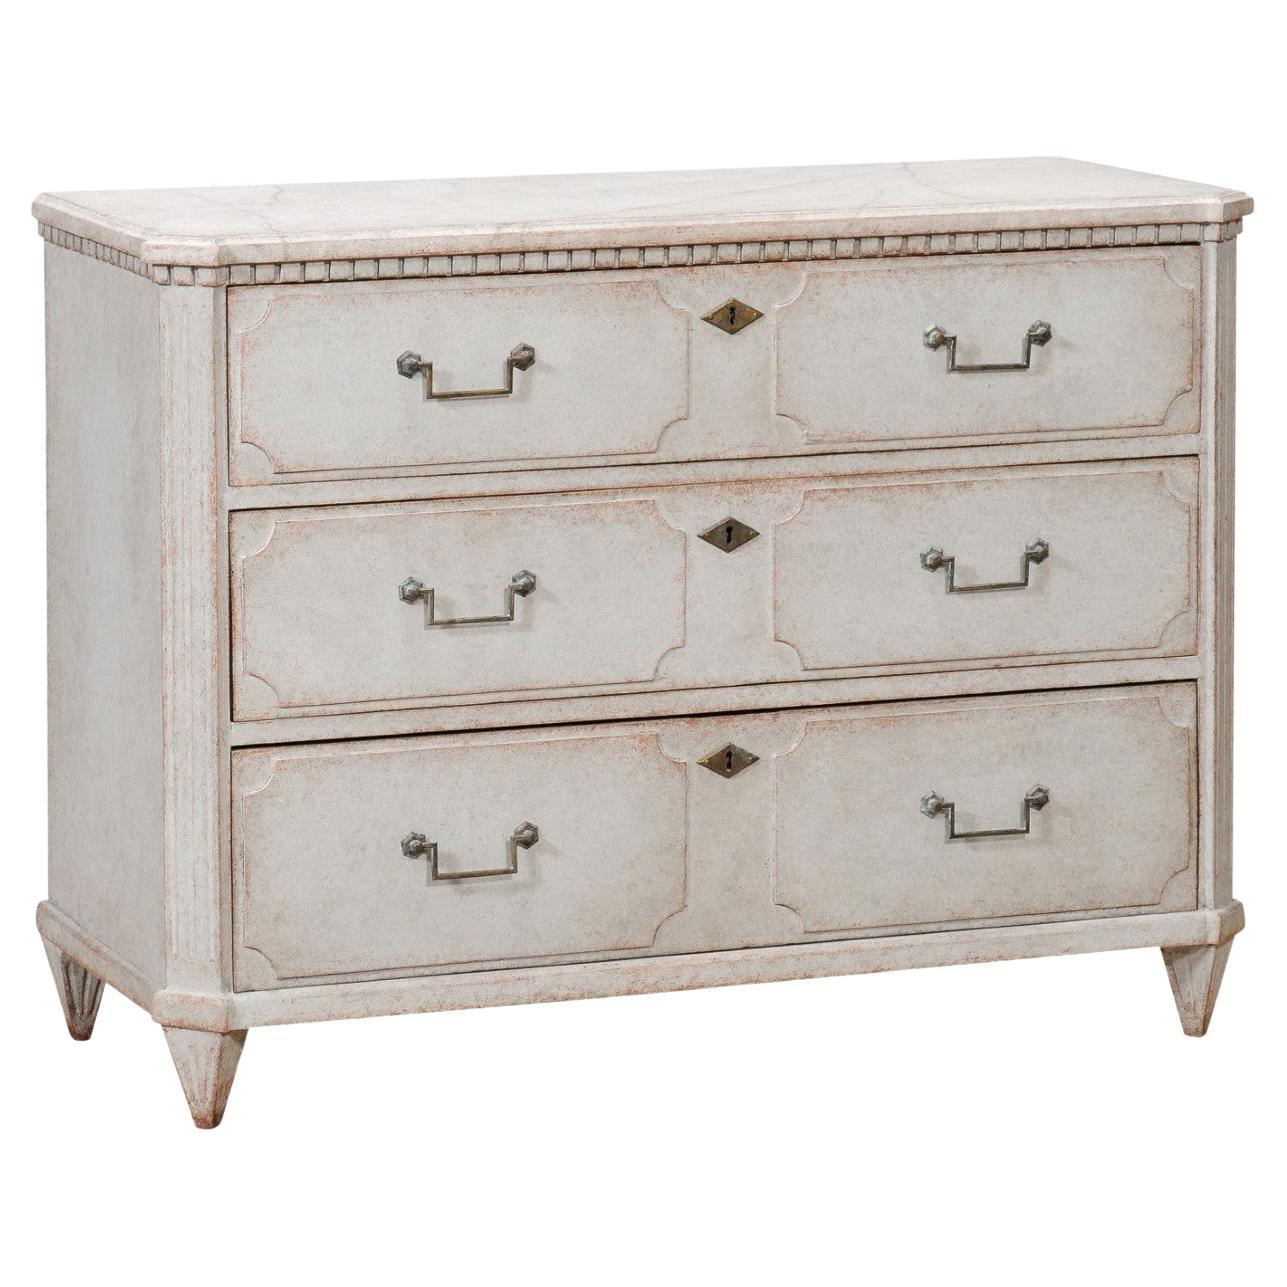 1860s Swedish Gustavian Style Painted Three-Drawer Chest with Dentil Molding